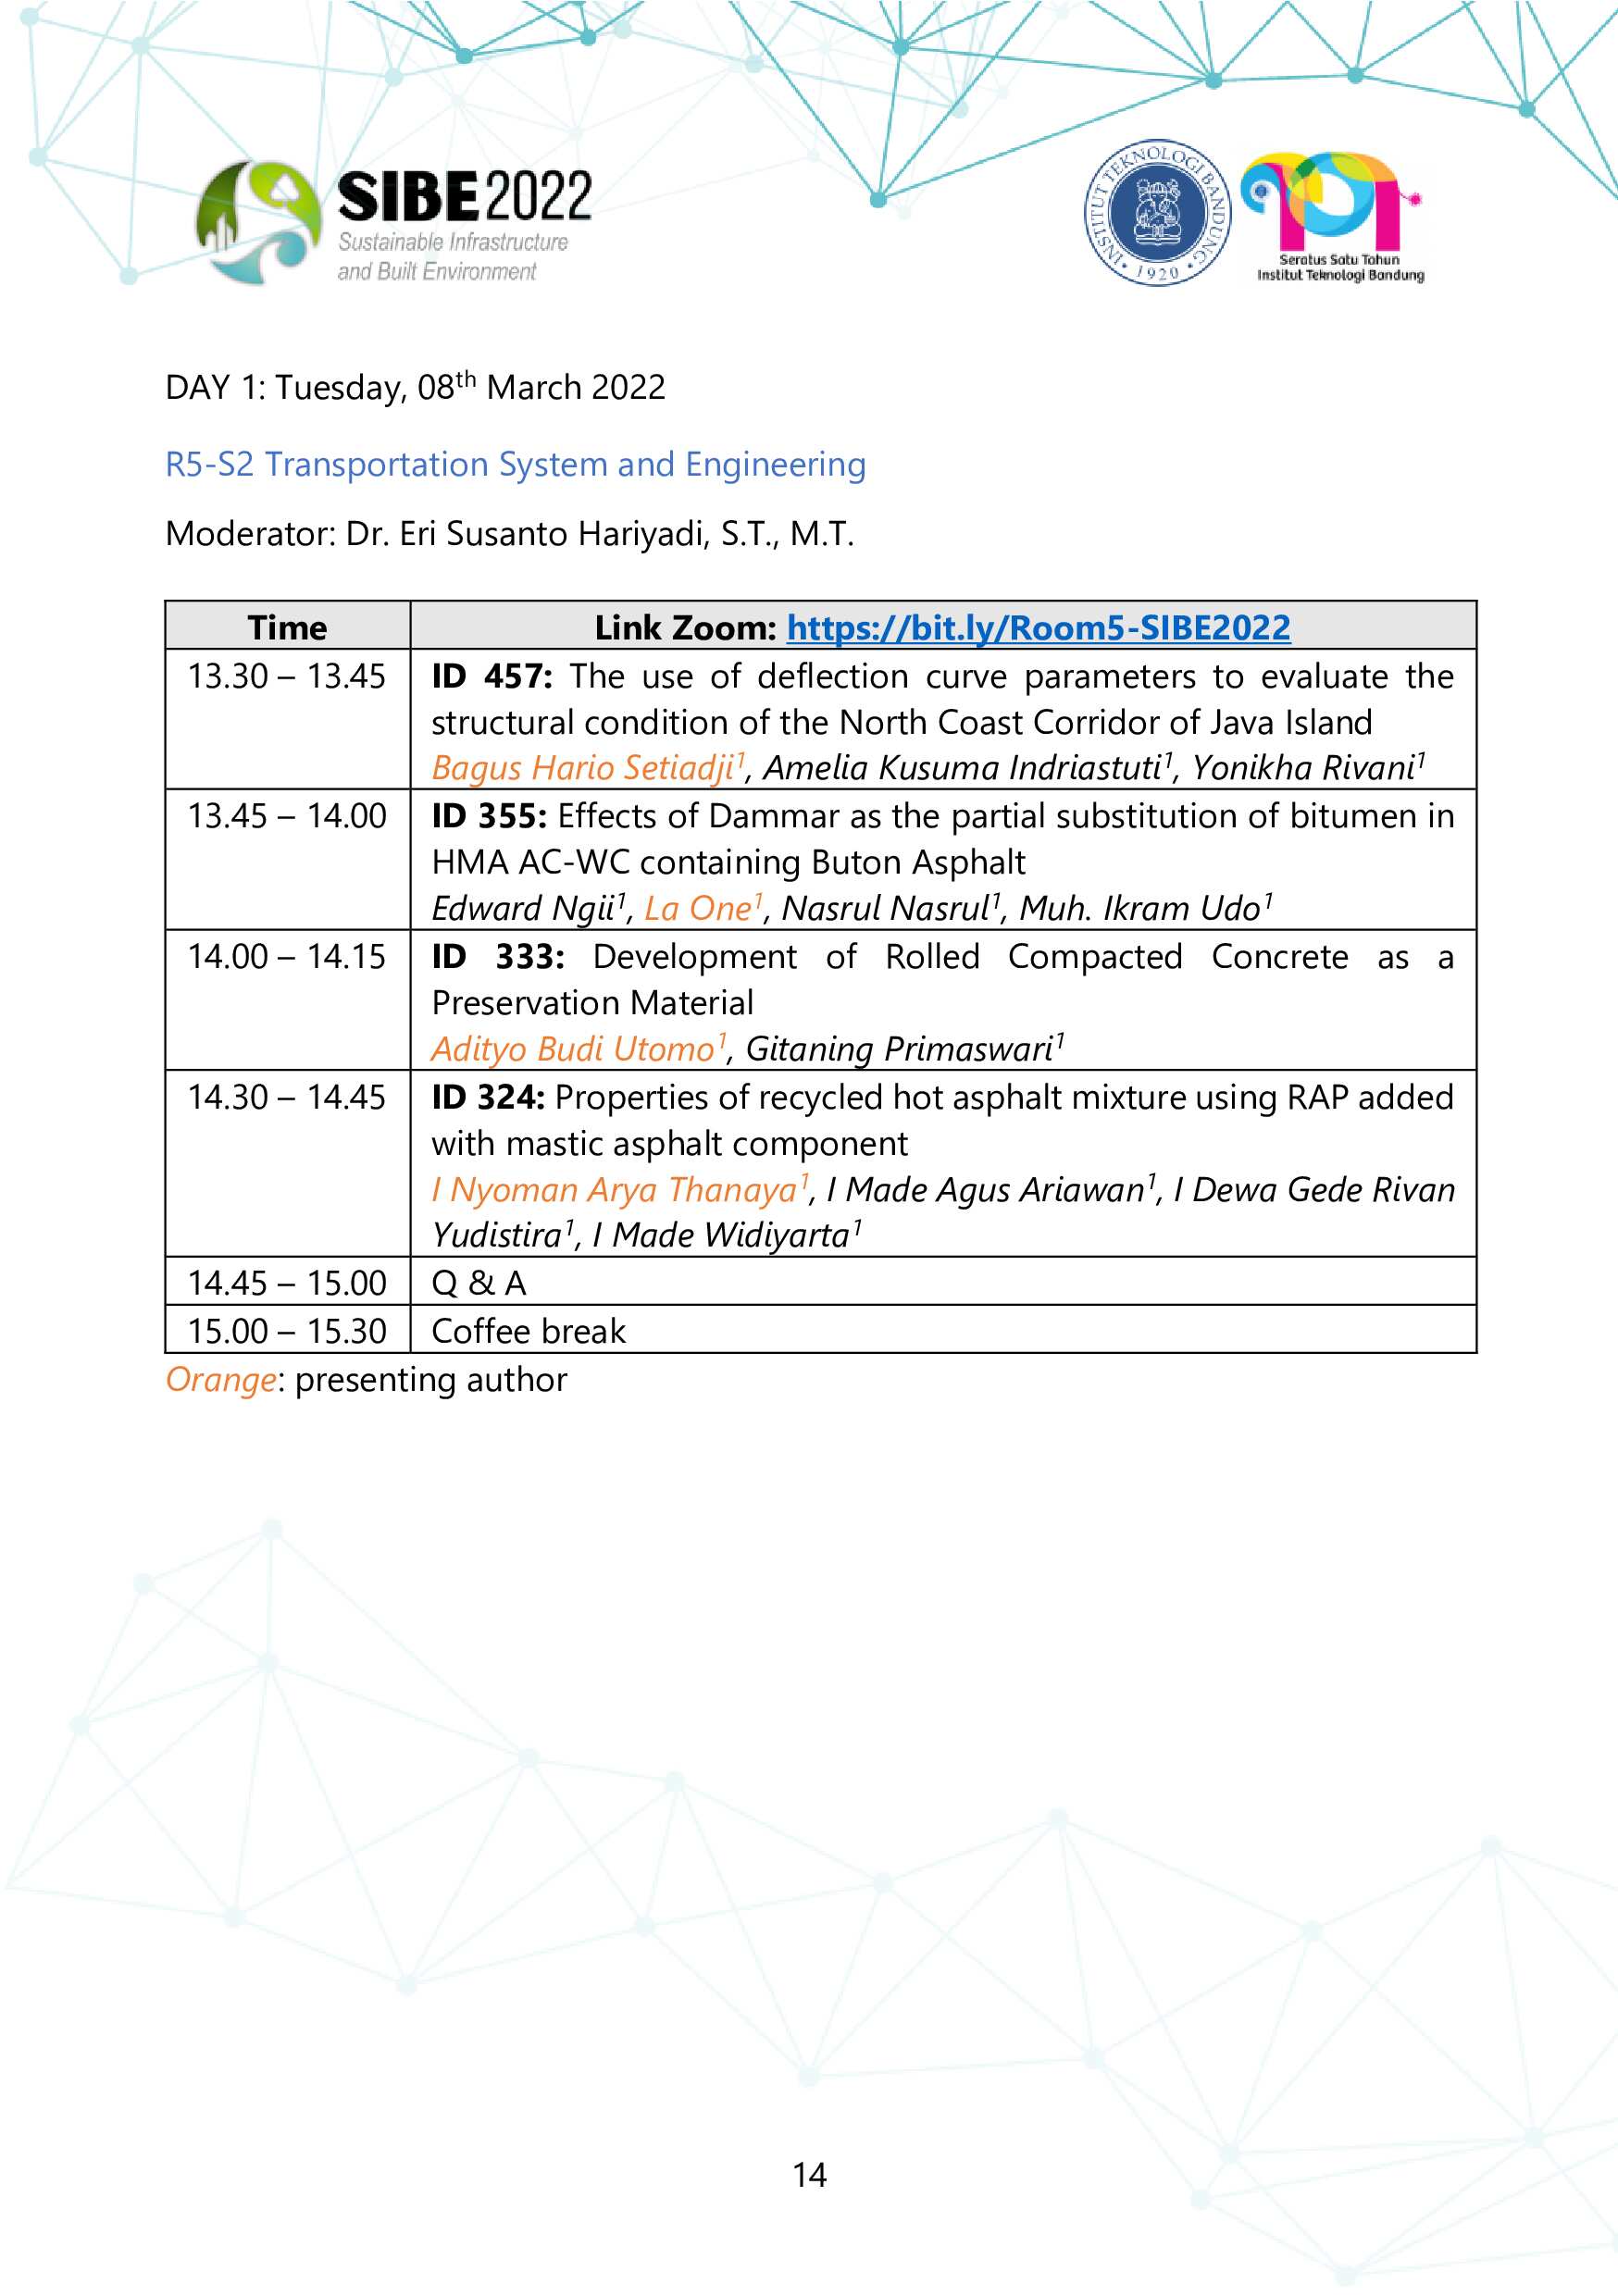 SIBE 2022 Program Schedule 8-9 March 2022-13